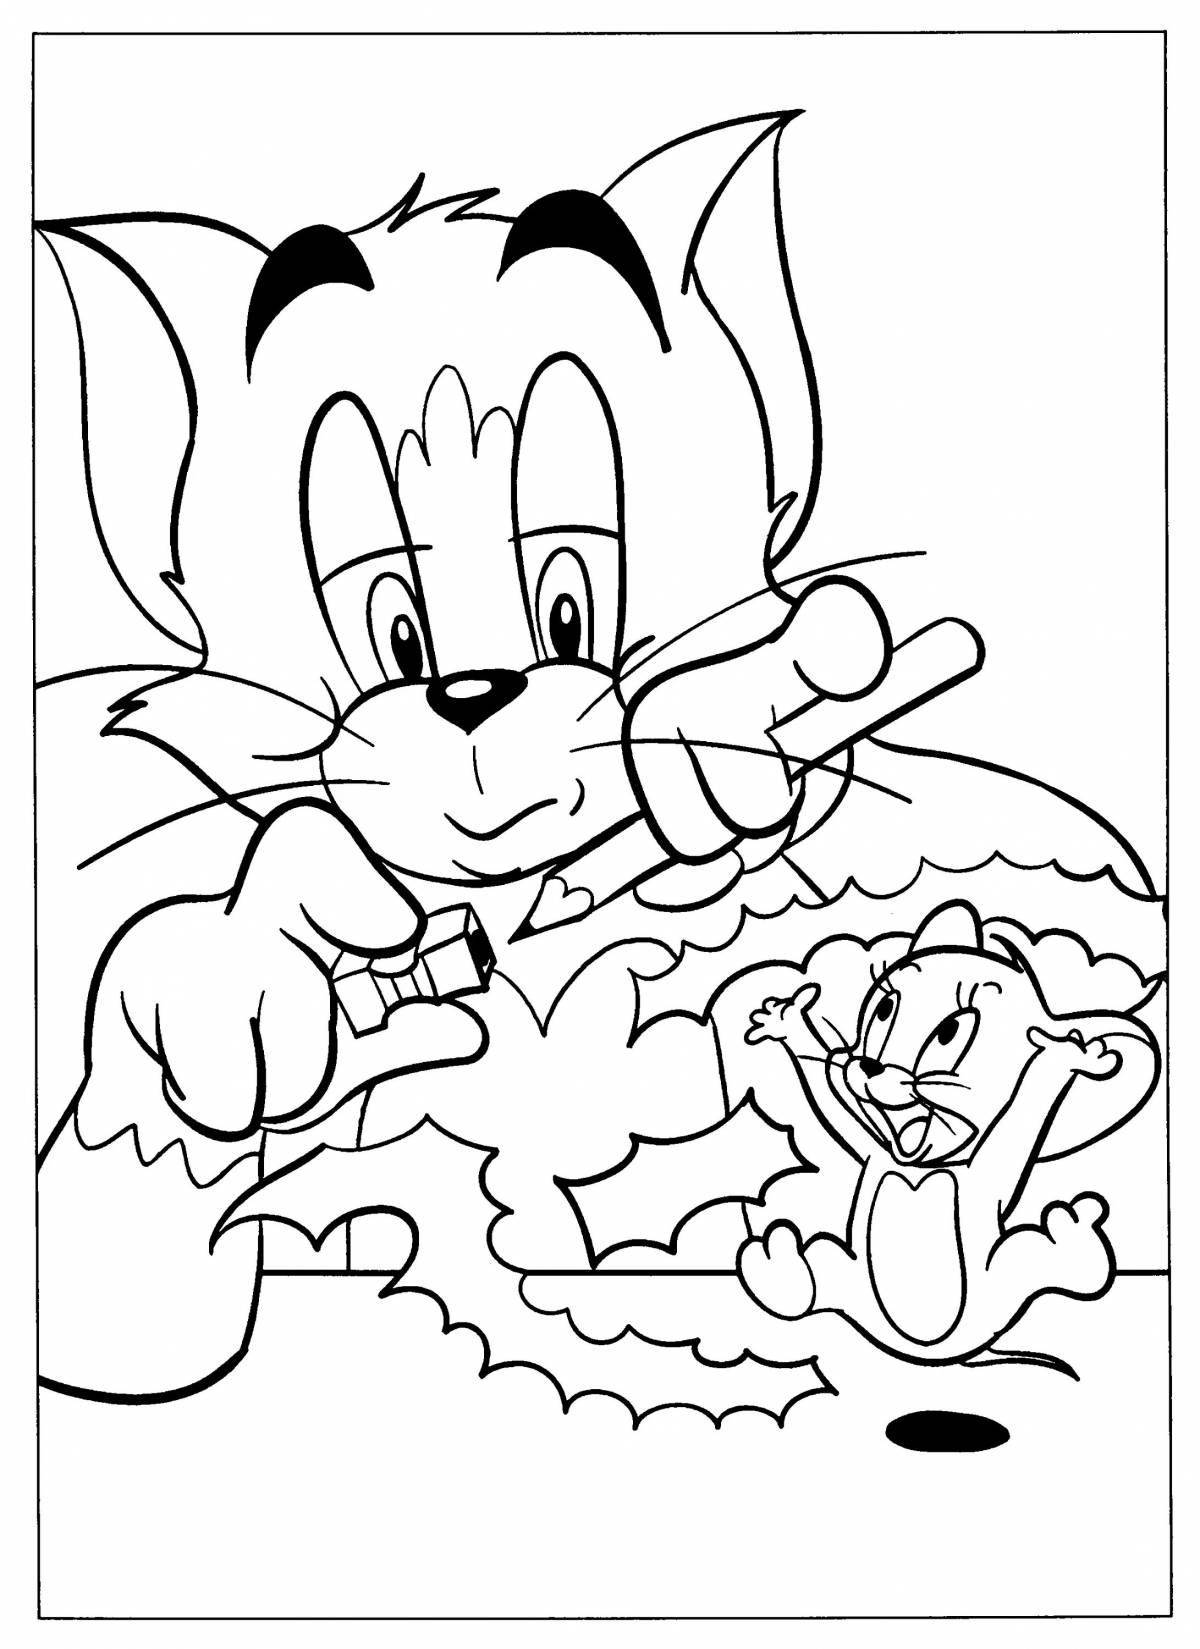 Living tom and jerry coloring game